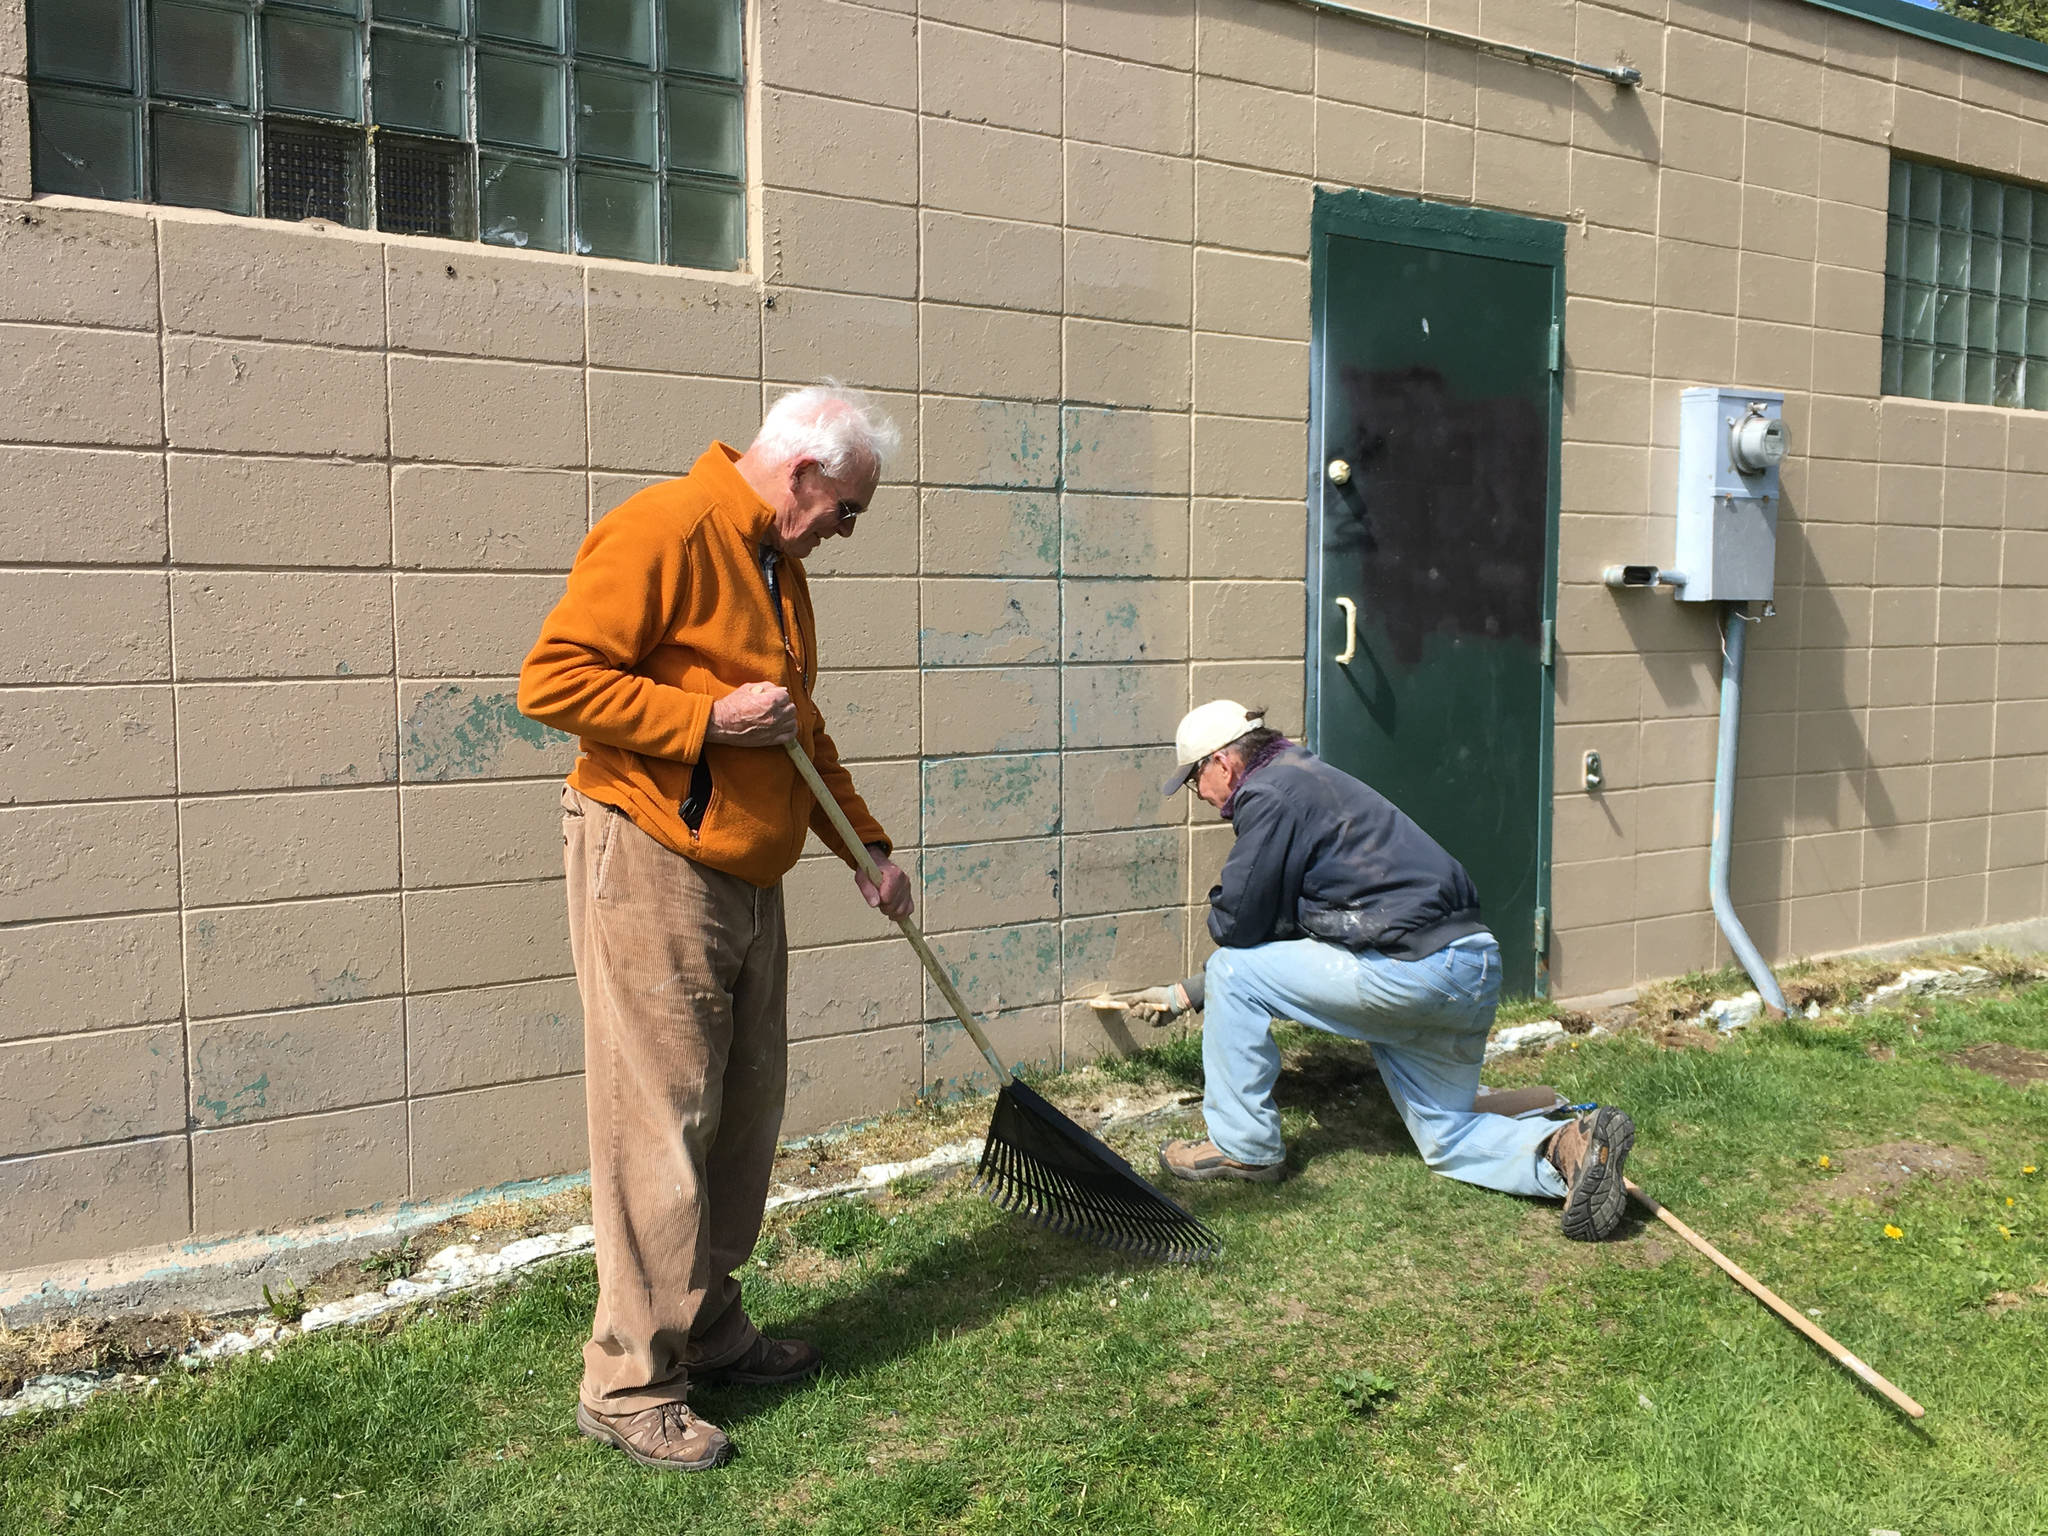 Homer-Kachemak Bay Rotarians Charlie Welles, left, rakes up paint chips while Maynard Gross, right, puts a new coat of paint on the restrooms at Ben Walters Park on June 9, 2018, in Homer, Alaska. (Photo provided)